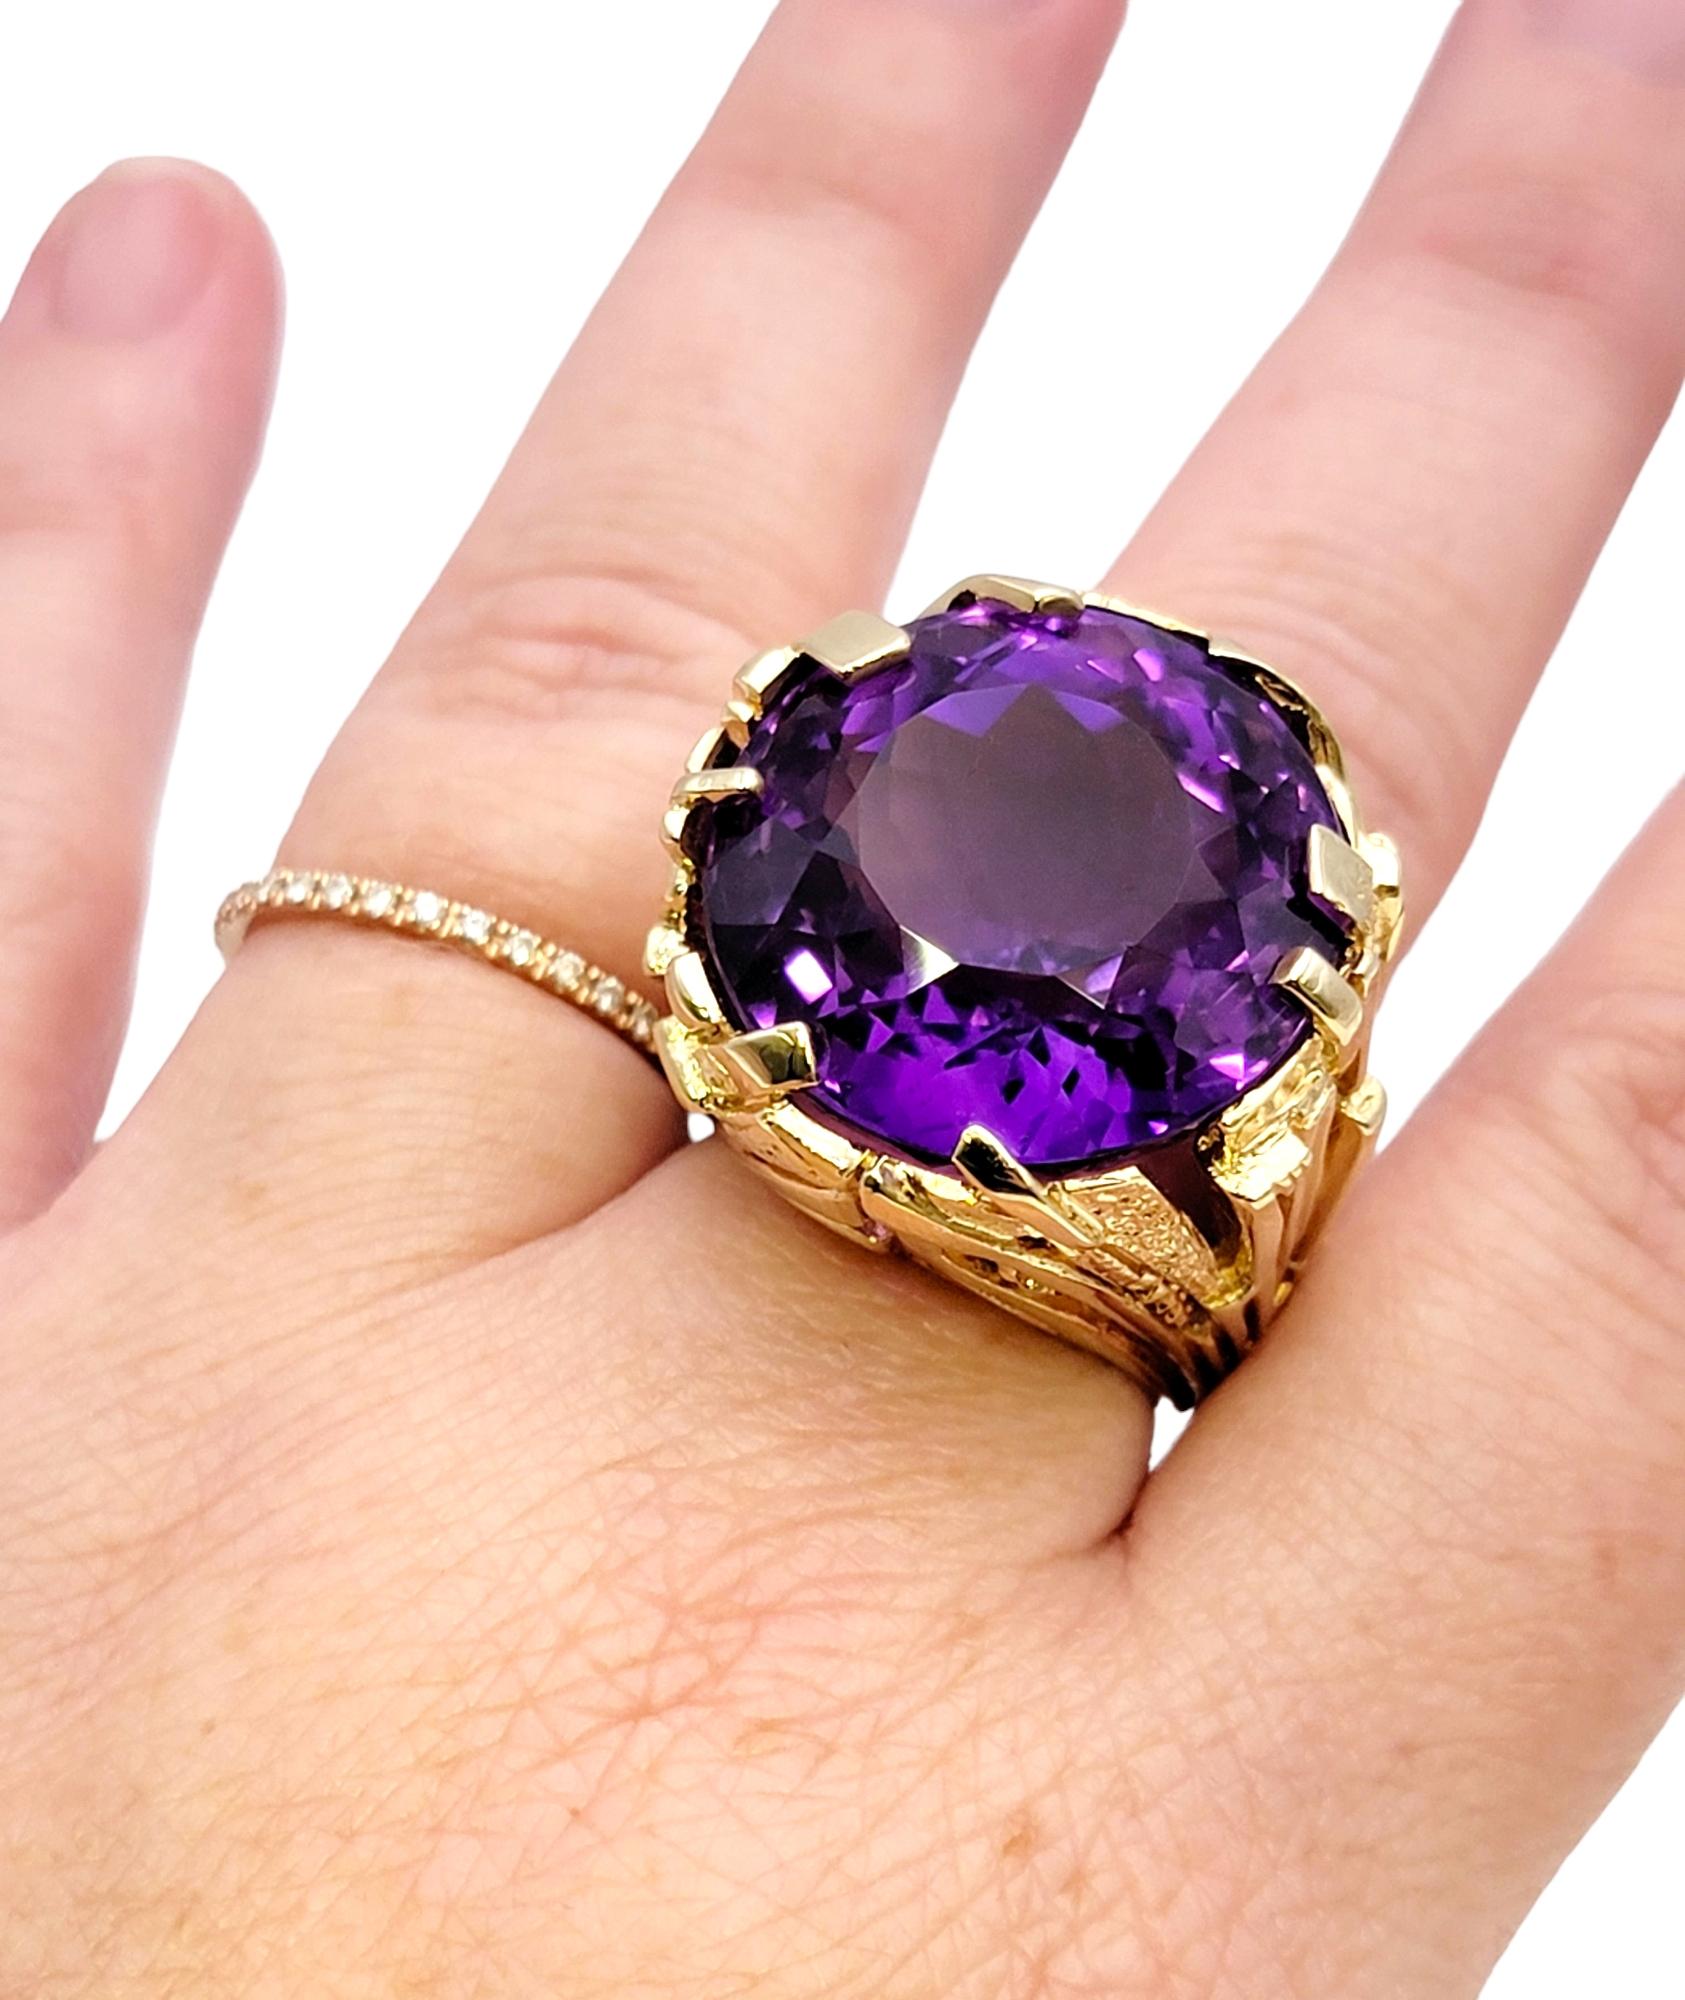 Massive 40.01 Carat Round Cut Amethyst Solitaire Cocktail Ring in Yellow Gold  For Sale 9